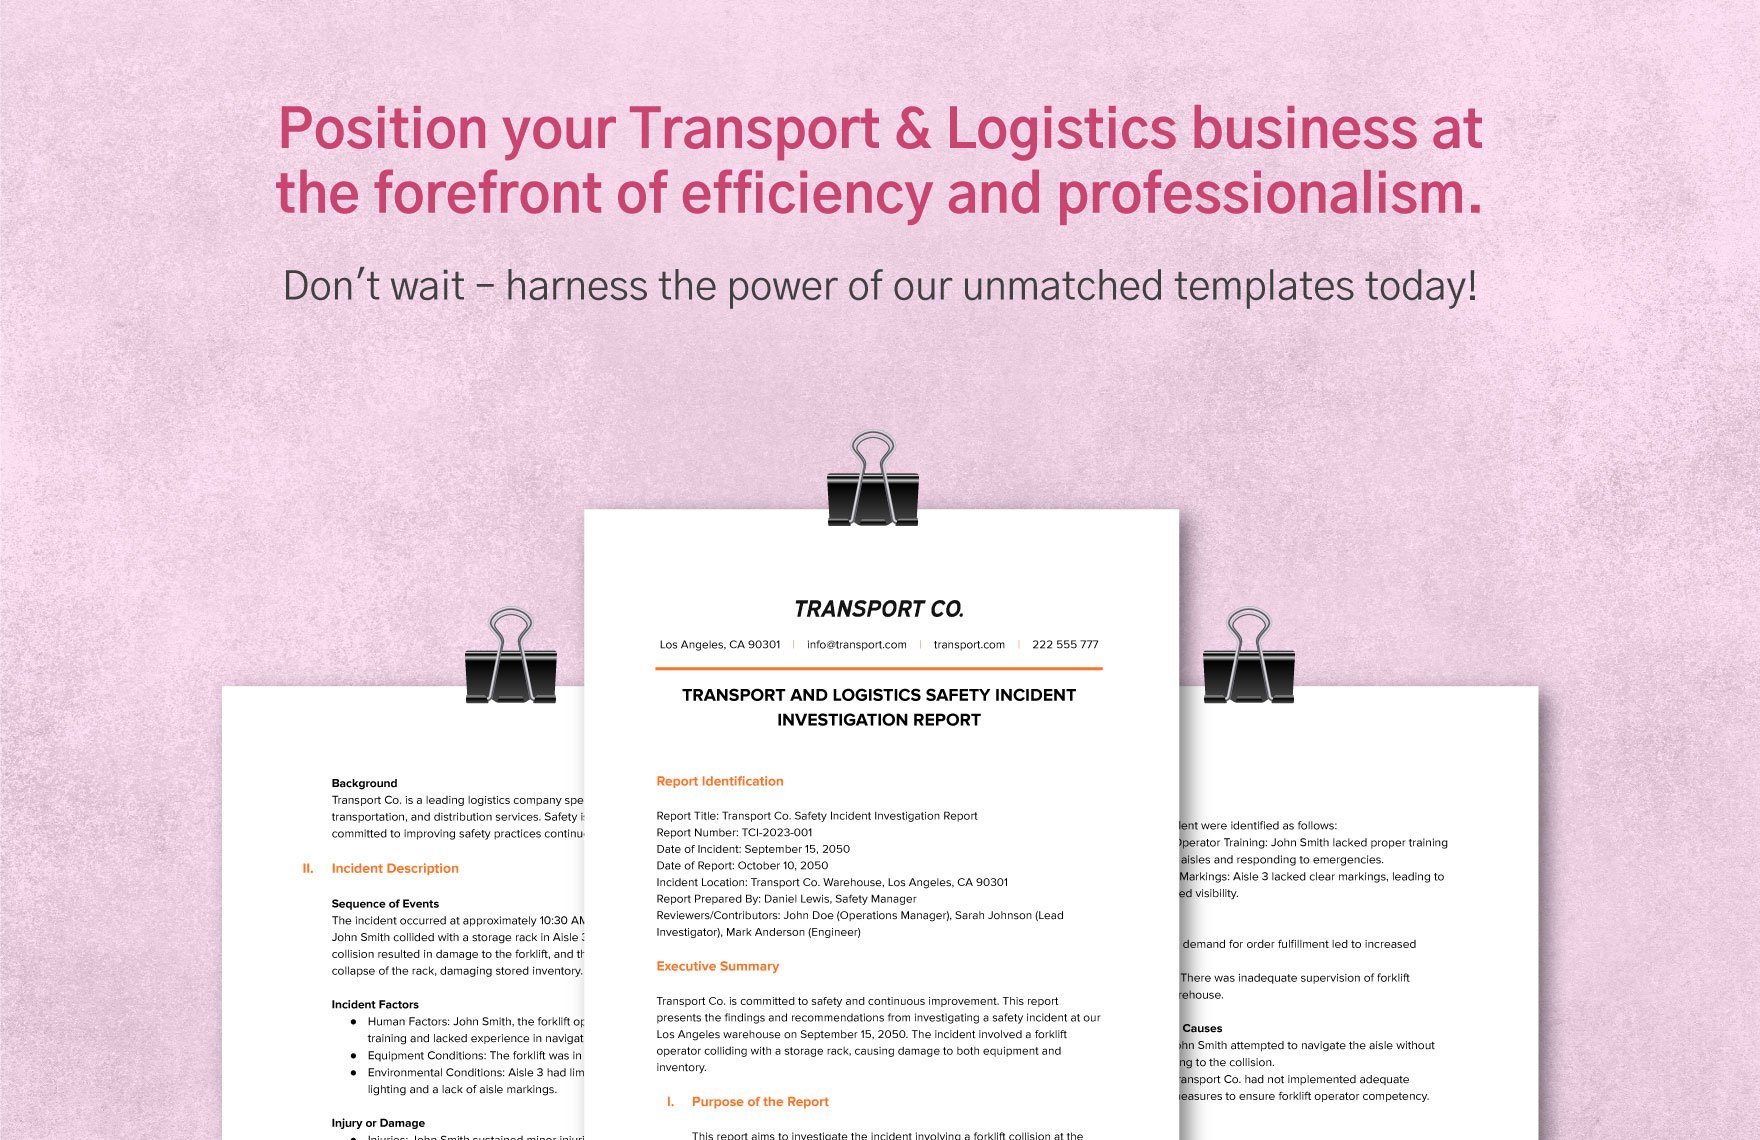 Transport and Logistics Safety Incident Investigation Report Template